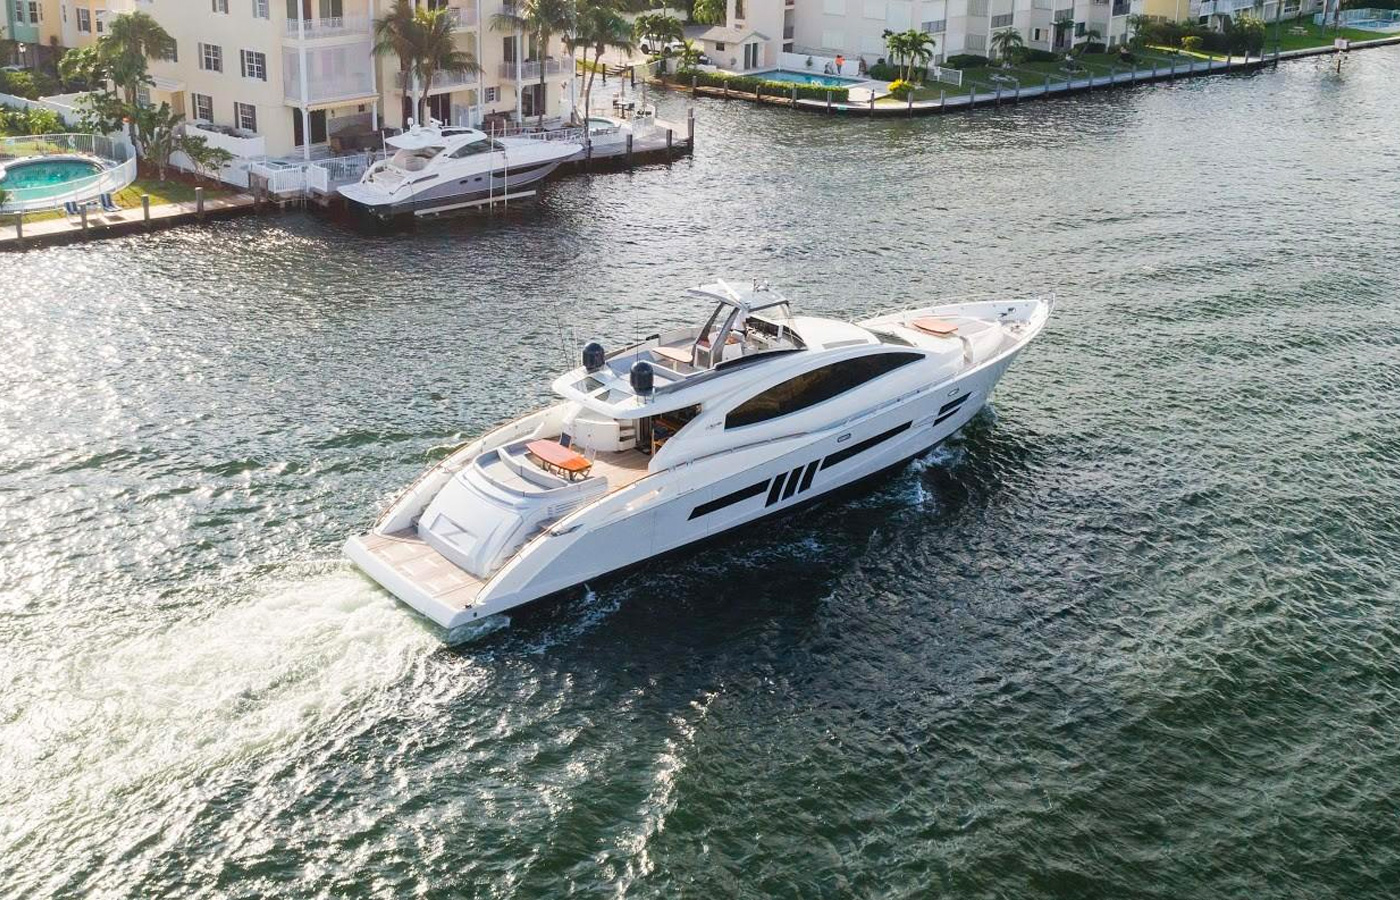 Top Charter Yachts At Miami Yacht Show 2020 [Boat Show Guide]